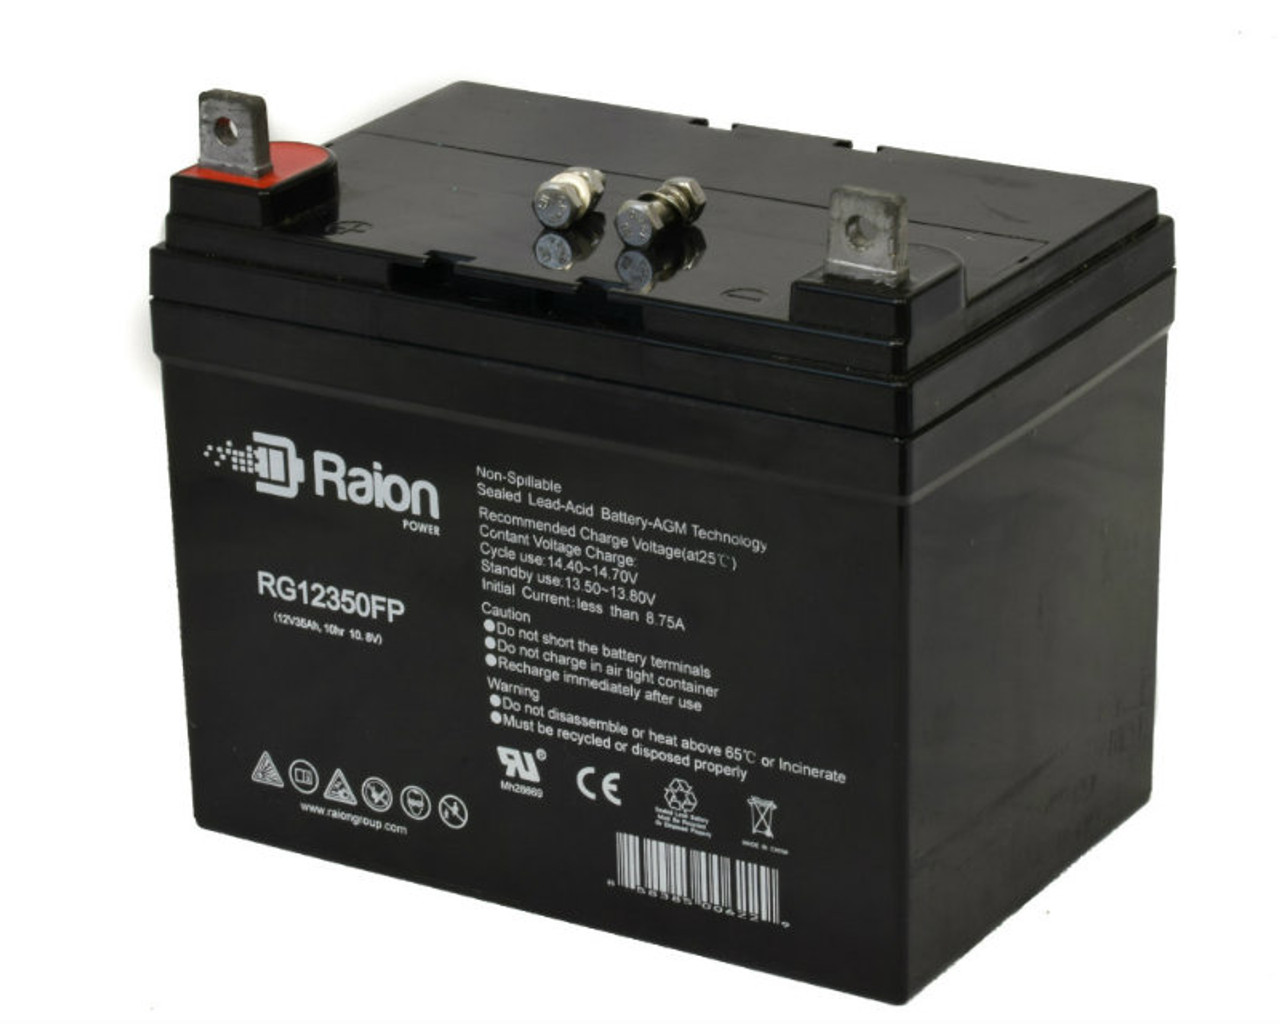 Raion Power Replacement 12V 35Ah RG12350FP Battery for Agco Allis 412G